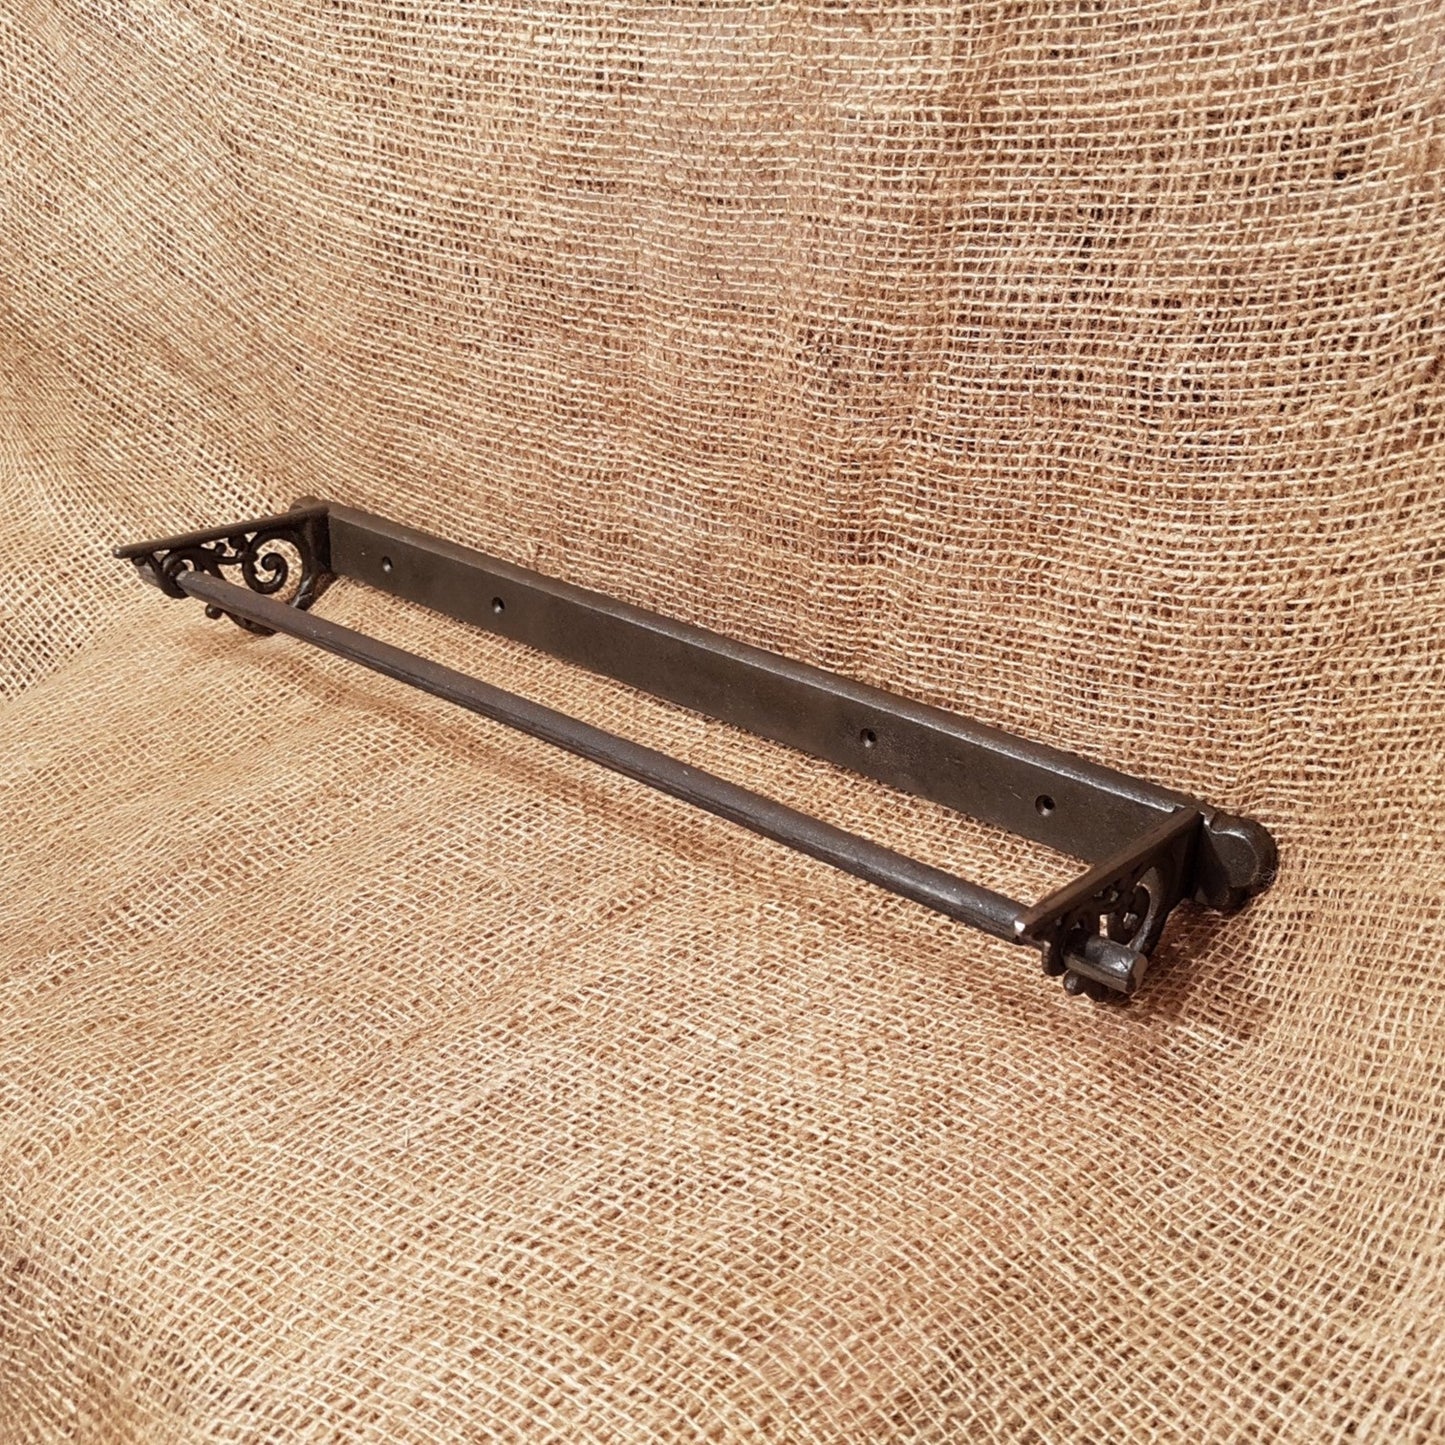 Towel Rail with Scroll Ends - 21" - Spearhead Collection - Rails & Rings - Bathroom Decor, Home Decor, Rails Rings & Eye Loops, Towel Holders